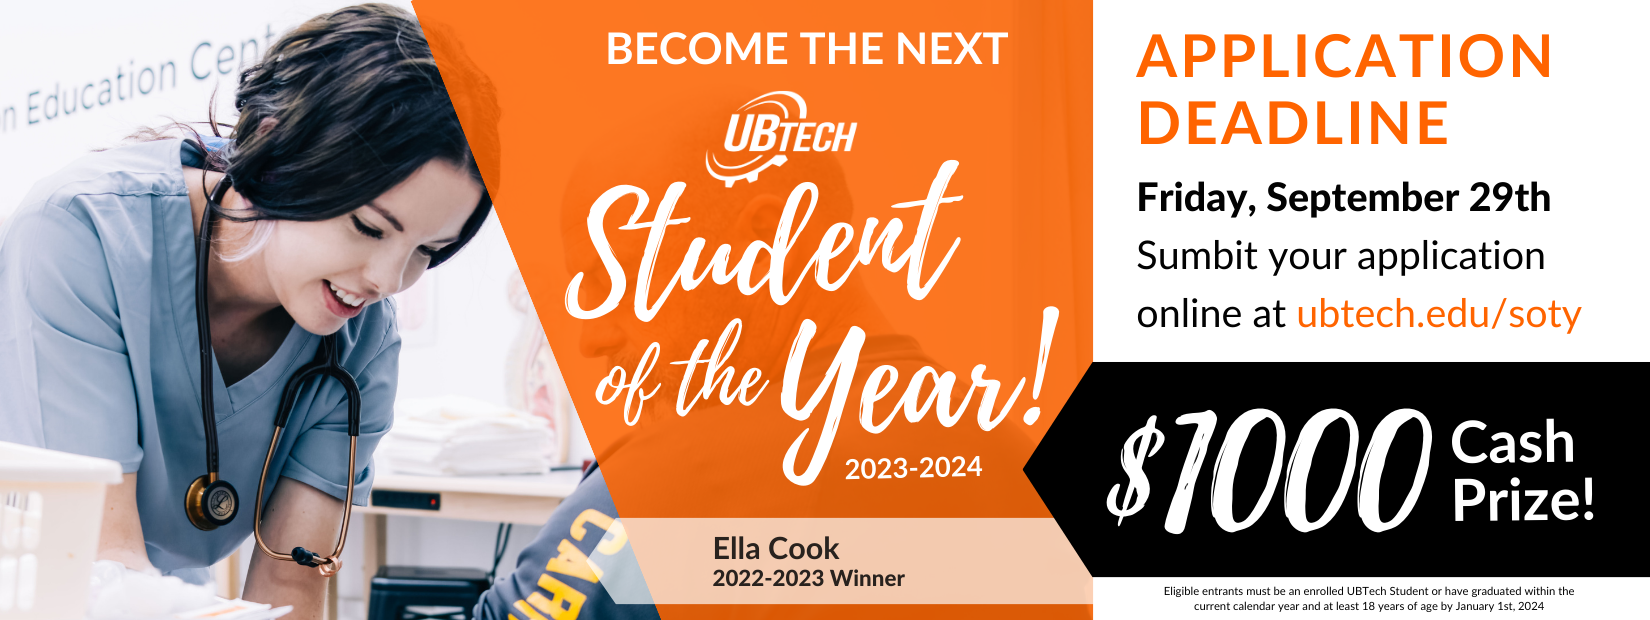 Become the next UBTech Student of the Year. Application deadline, Friday, September 29th. Submit your application at ubtech.edu/soty. $1000 cash prize.